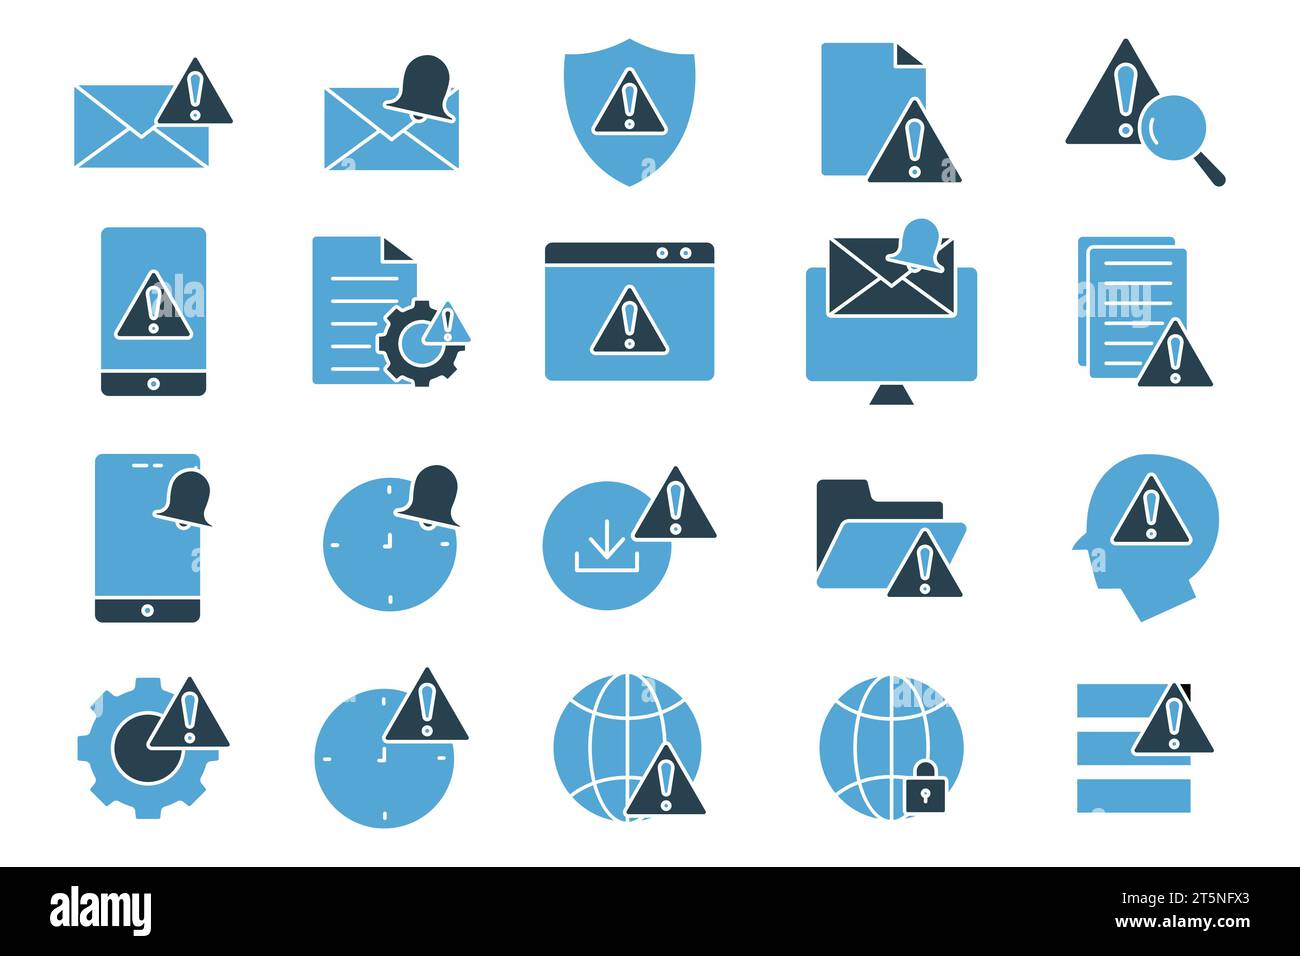 warning and notification icon set. warning, notification, system error, network error, secured network.etc. solid icon style design. Simple vector des Stock Vector